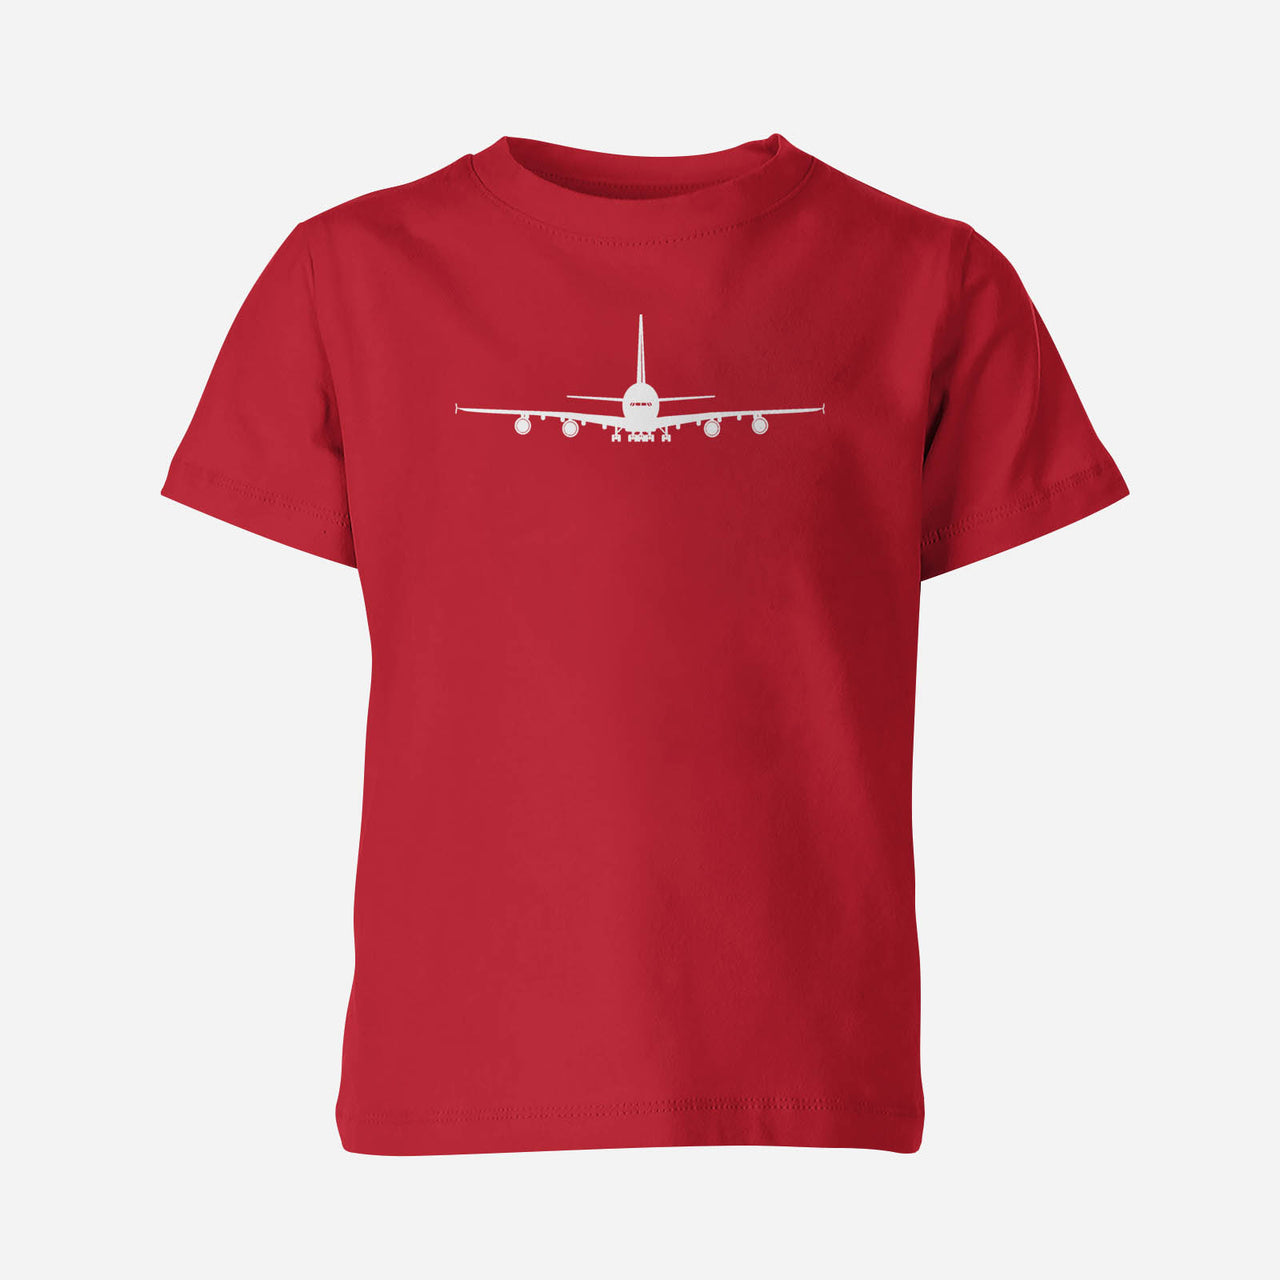 Airbus A380 Silhouette Designed Children T-Shirts